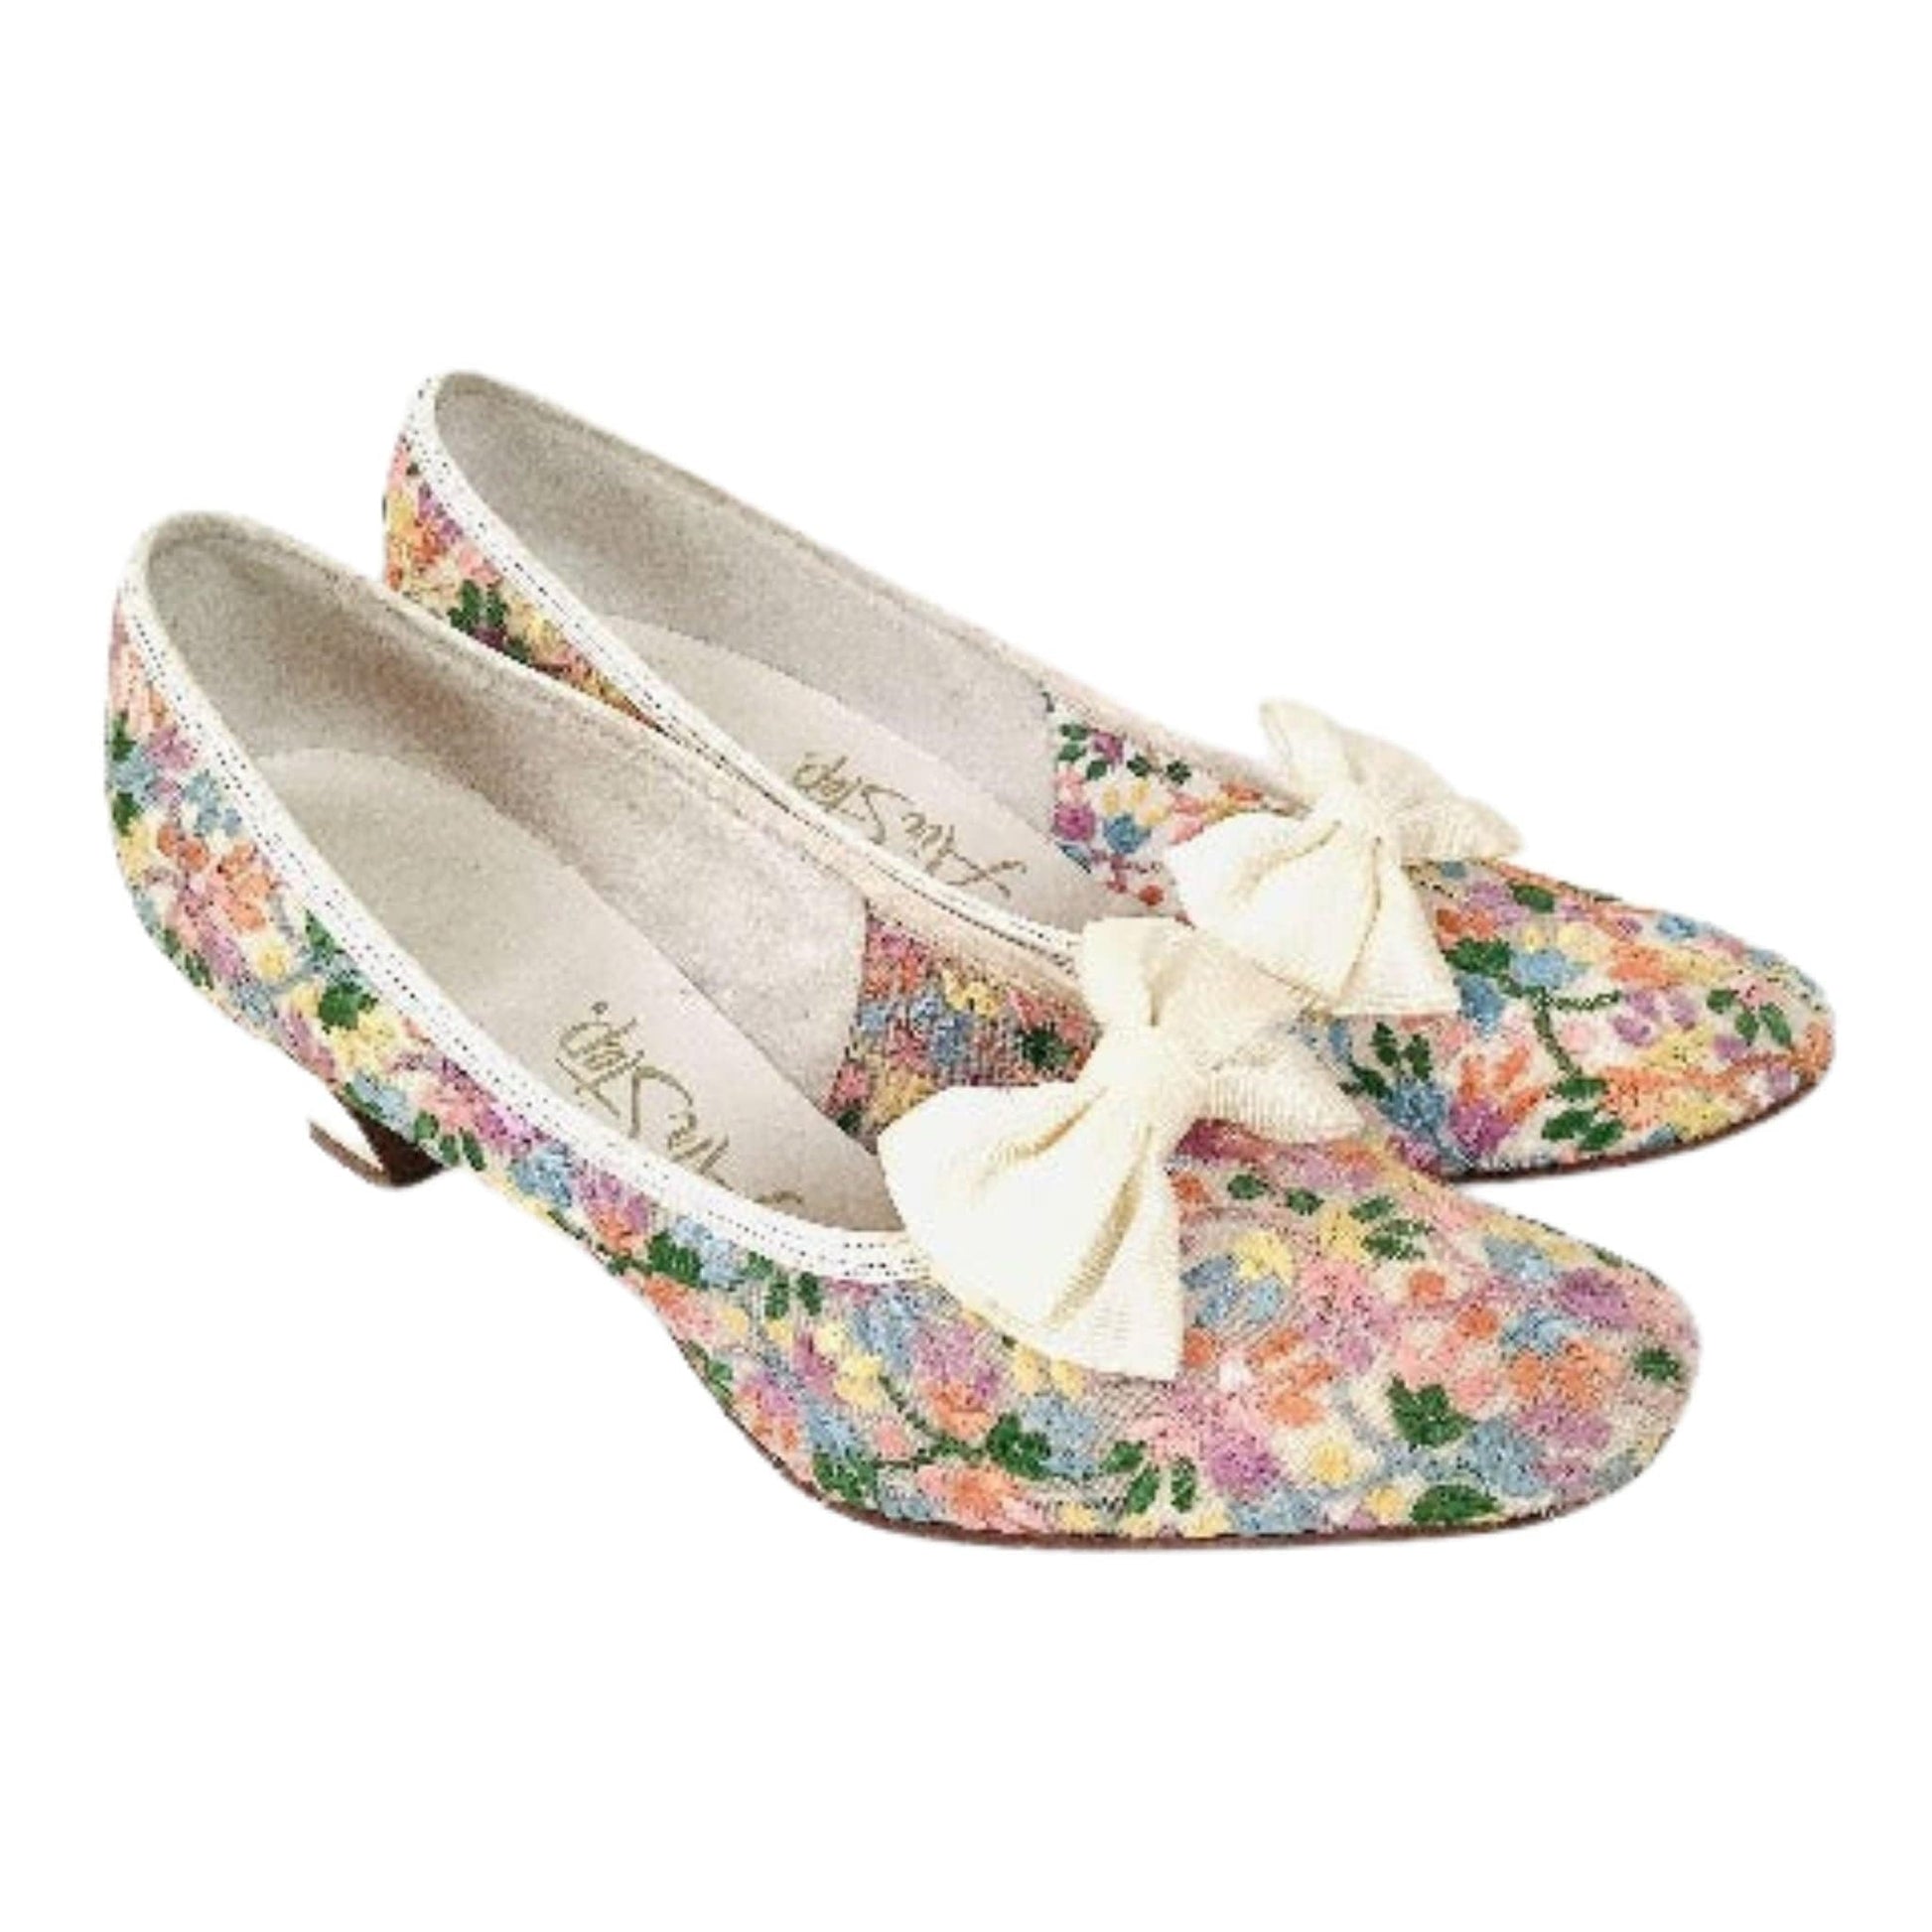 Embroidered Pump Shoes 7 / Multi / Vintage 1960s